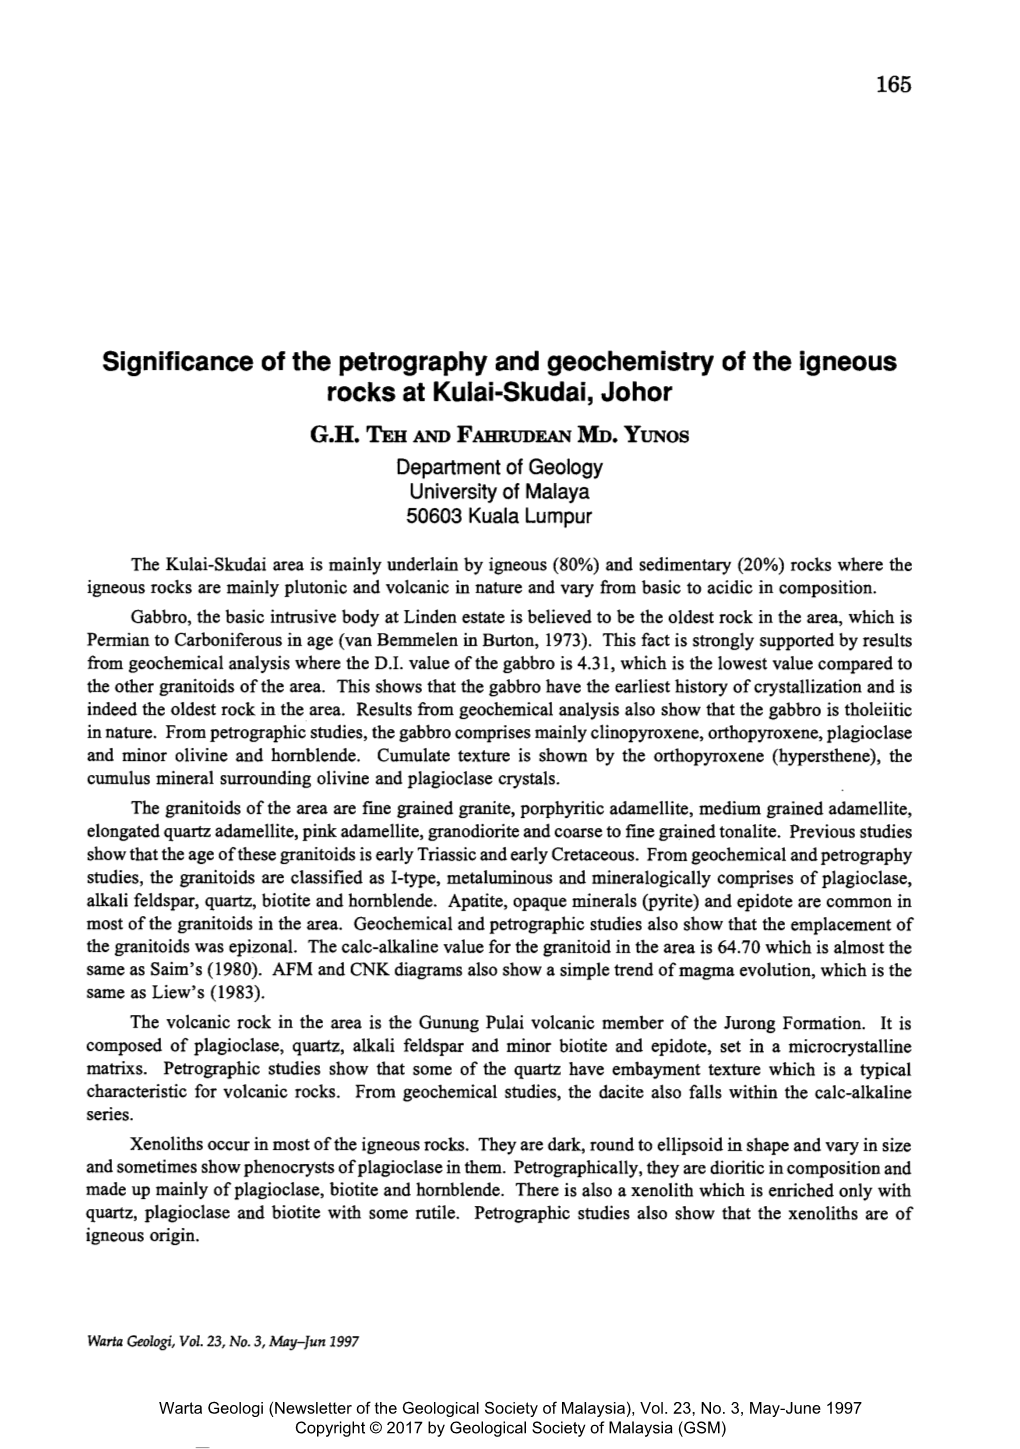 Significance of the Petrography and Geochemistry of the Igneous Rocks at Kulai-Skudai, Johor